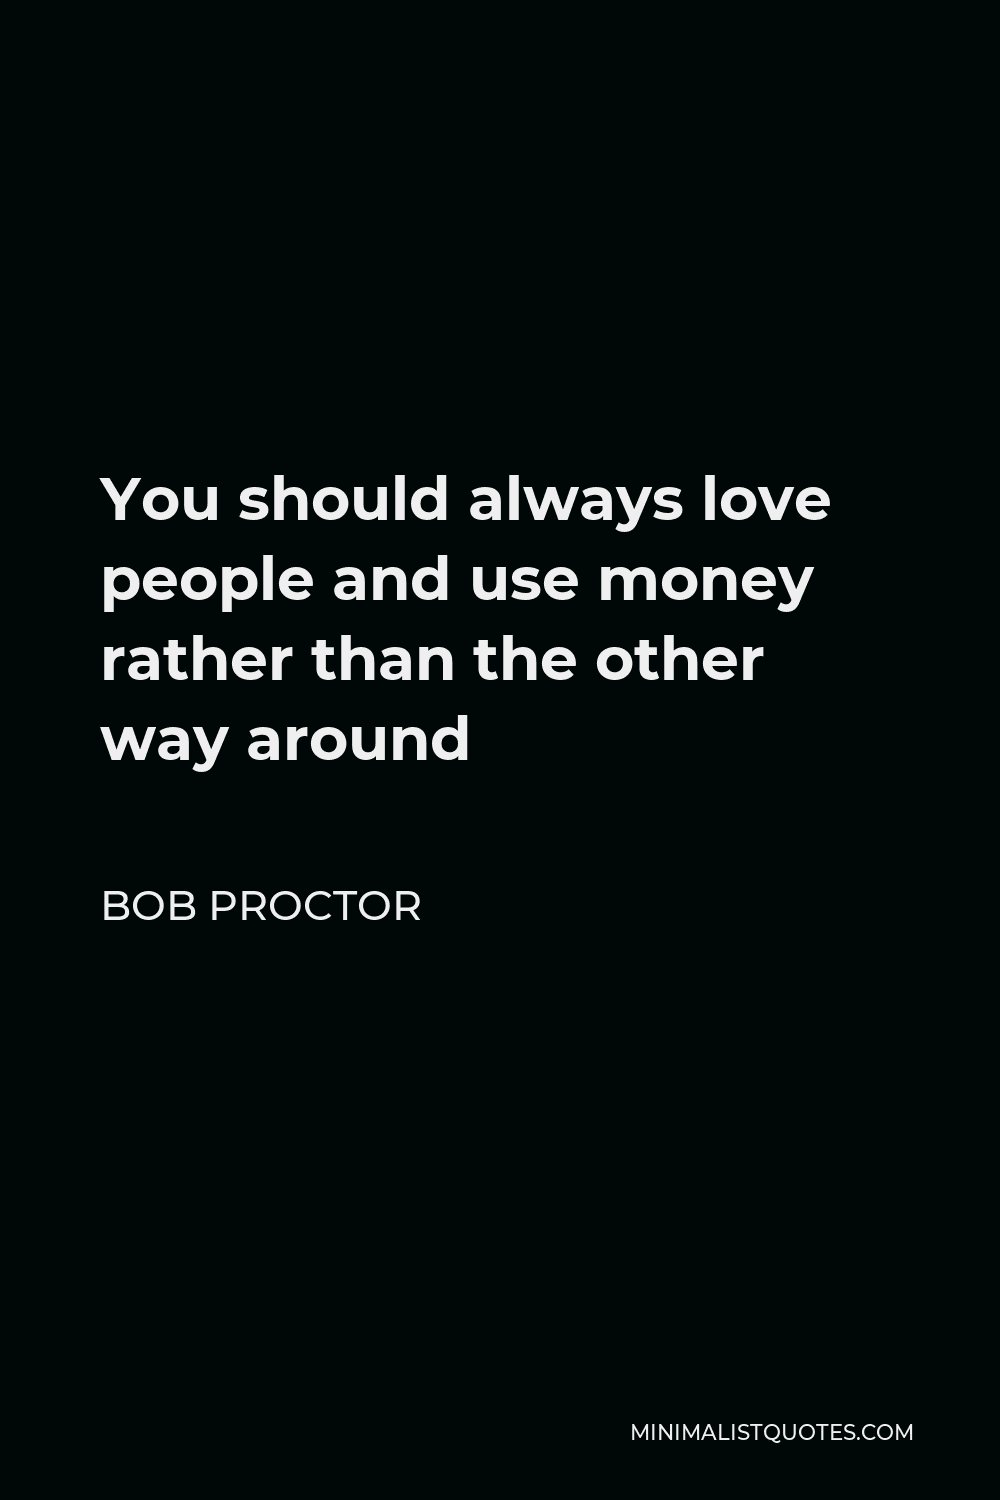 Bob Proctor Quote - You should always love people and use money rather than the other way around